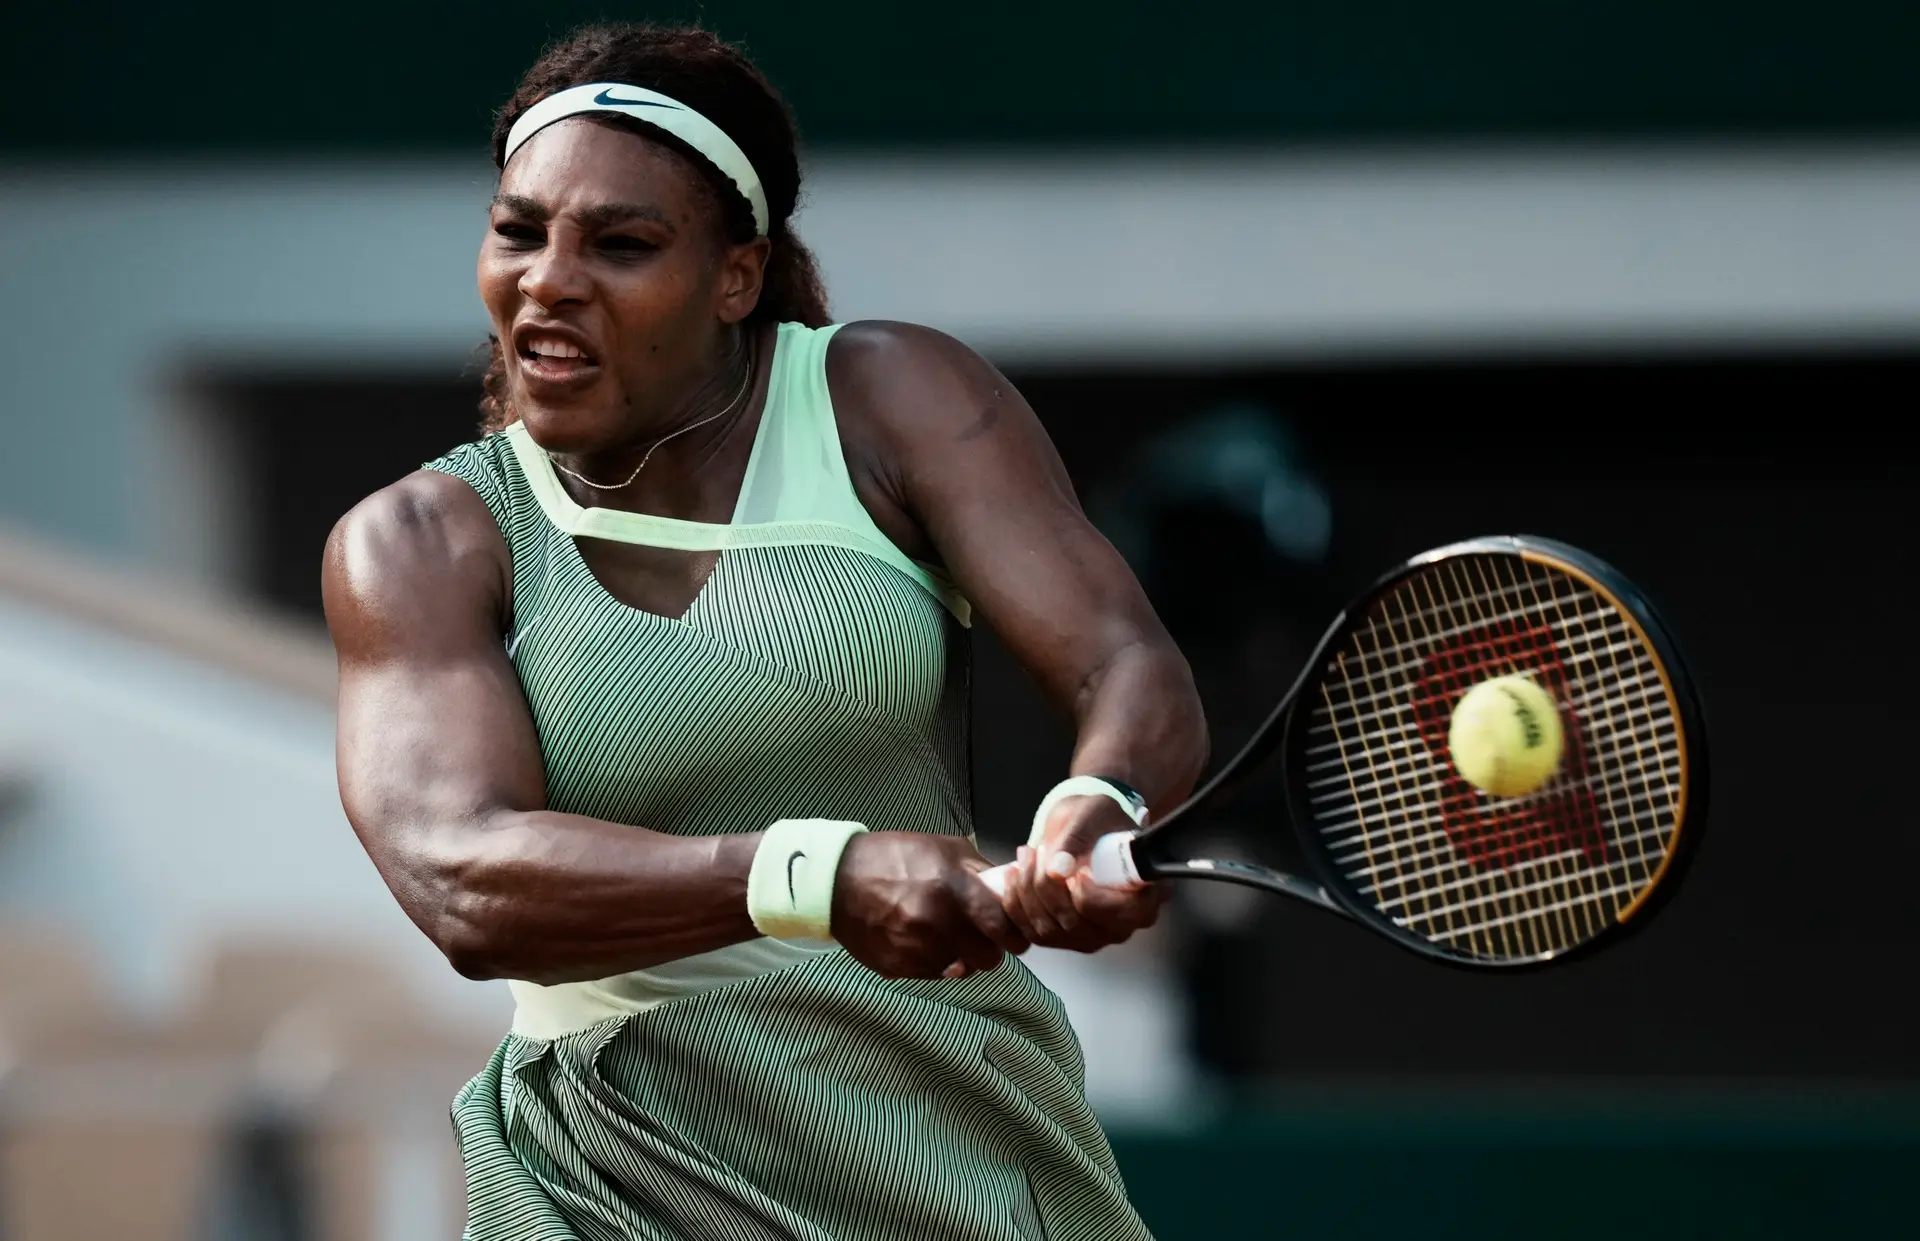 FILE – Serena Williams plays a return to Kazakhstan’s Elena Rybakina during their fourth round match on day 8 of the French Open tennis tournament at Roland Garros in Paris, France, in this Sunday, June 6, 2021, file photo. Serena Williams is expected to compete in the Wimbledon tennis tournament that begins on Monday, June 28, 2021. (AP Photo/Thibault Camus, File)